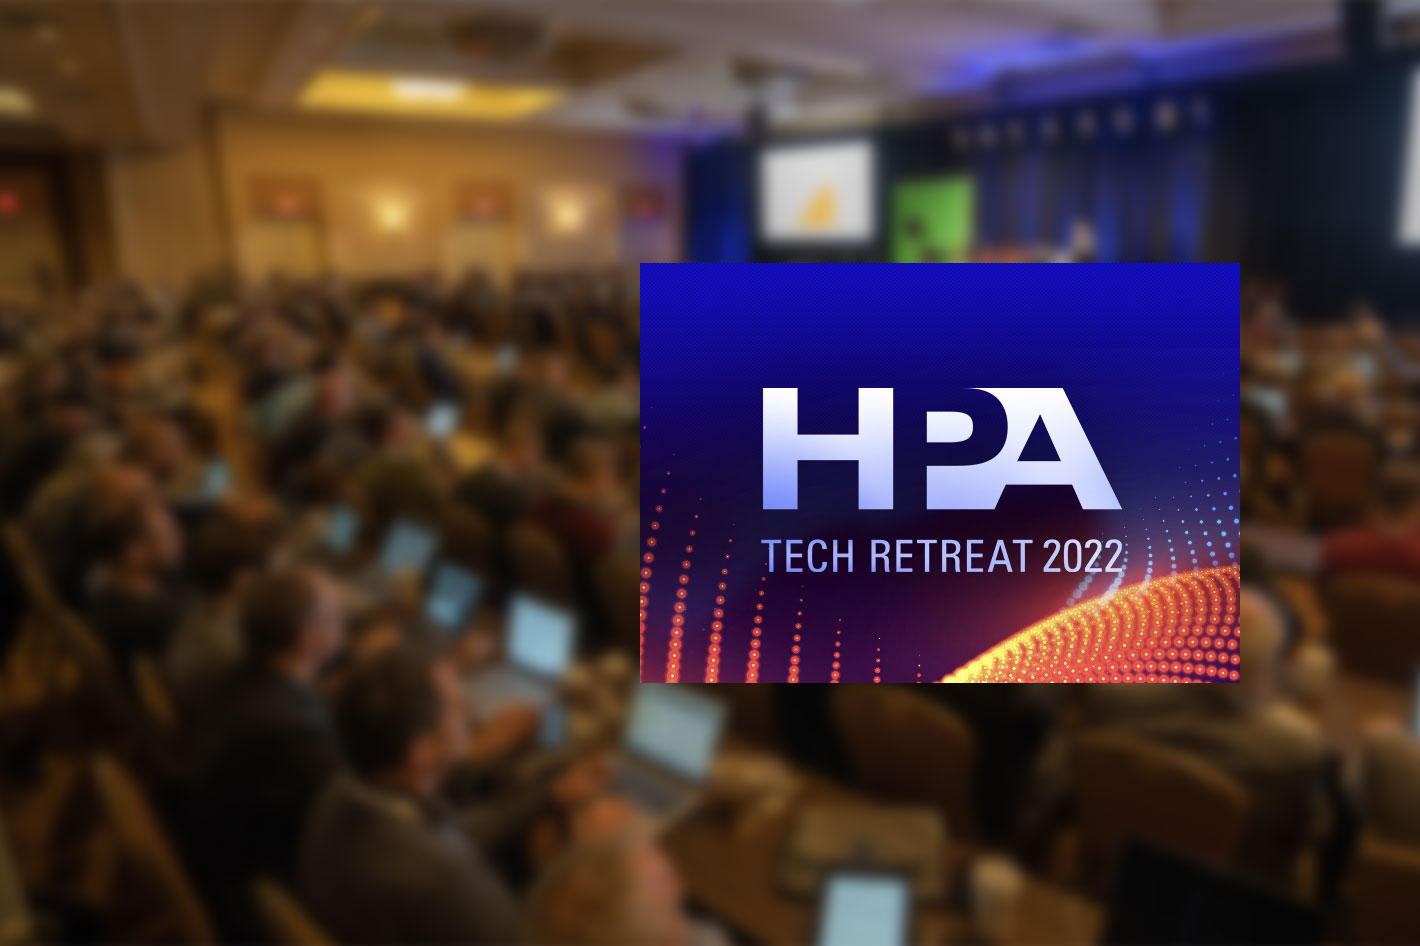 2022 HPA Tech Retreat Supersession is all about Virtual Production